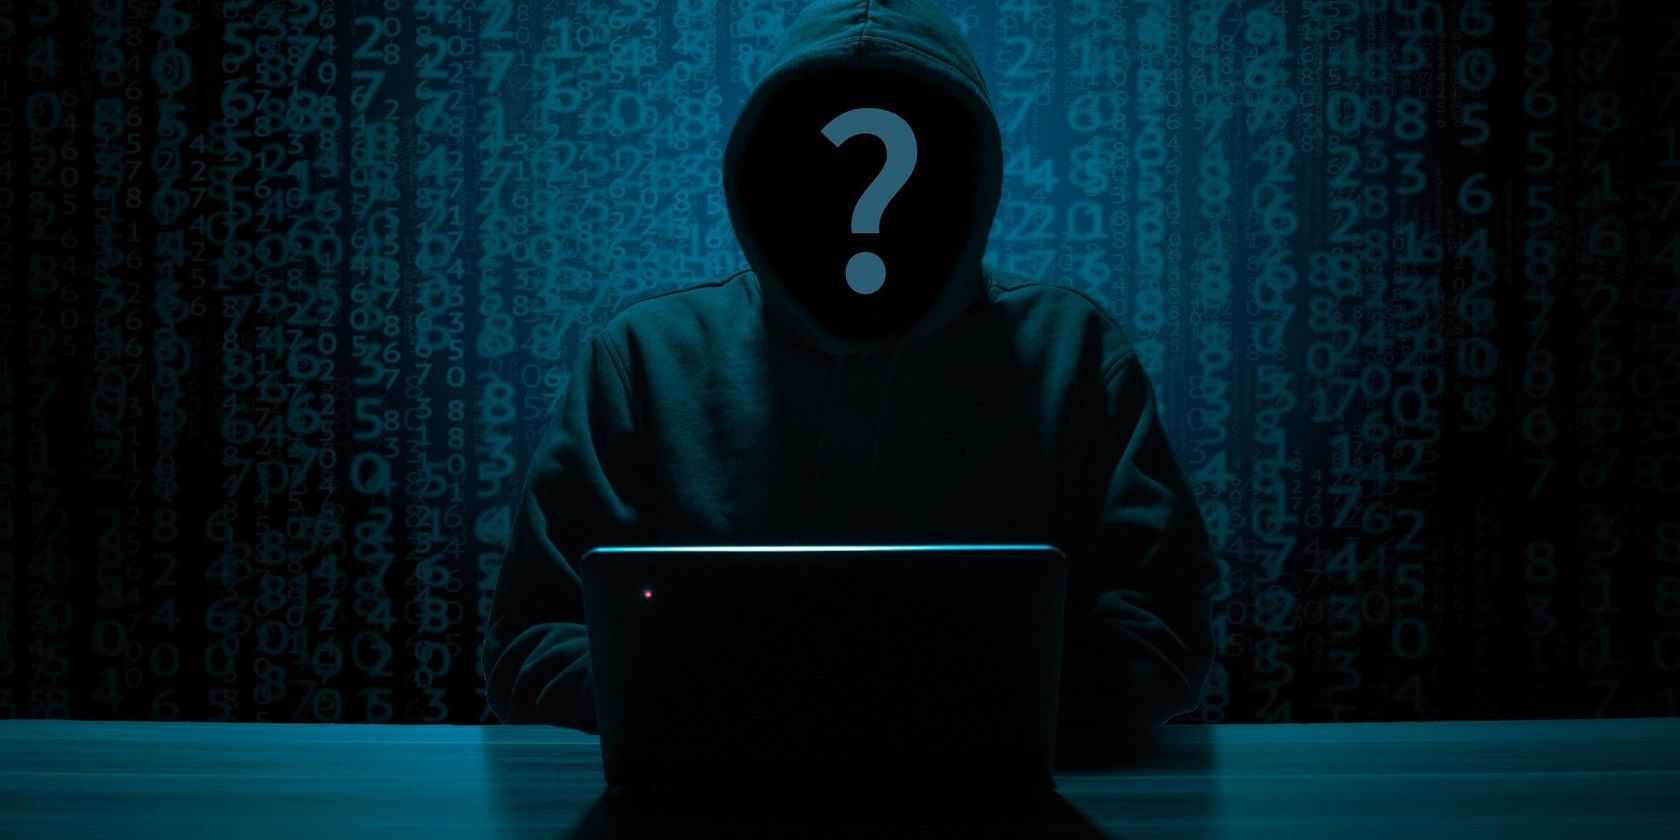 Anonymous hacker's face in a black hoody with a PC on the table